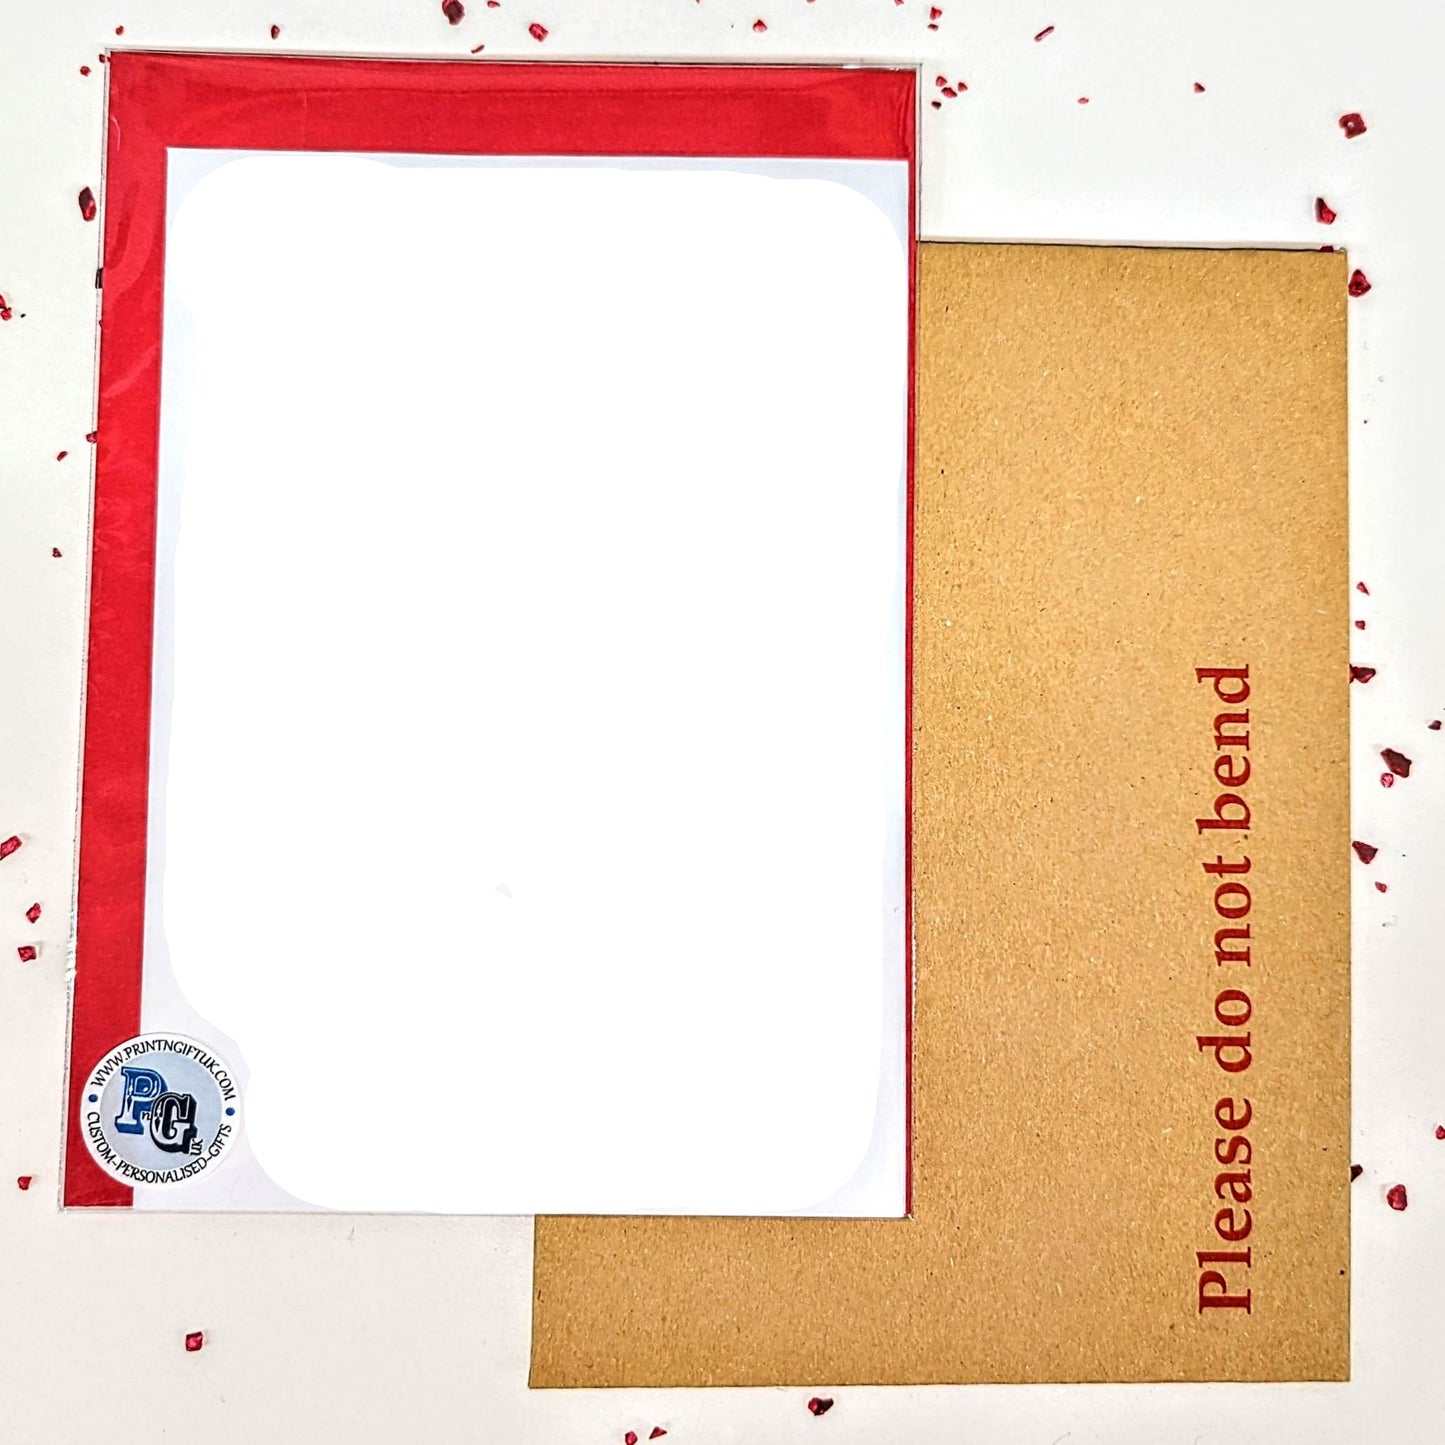 "Let's be weird together" Alternative Valentine's Day Skeleton Greetings Card with red envelope